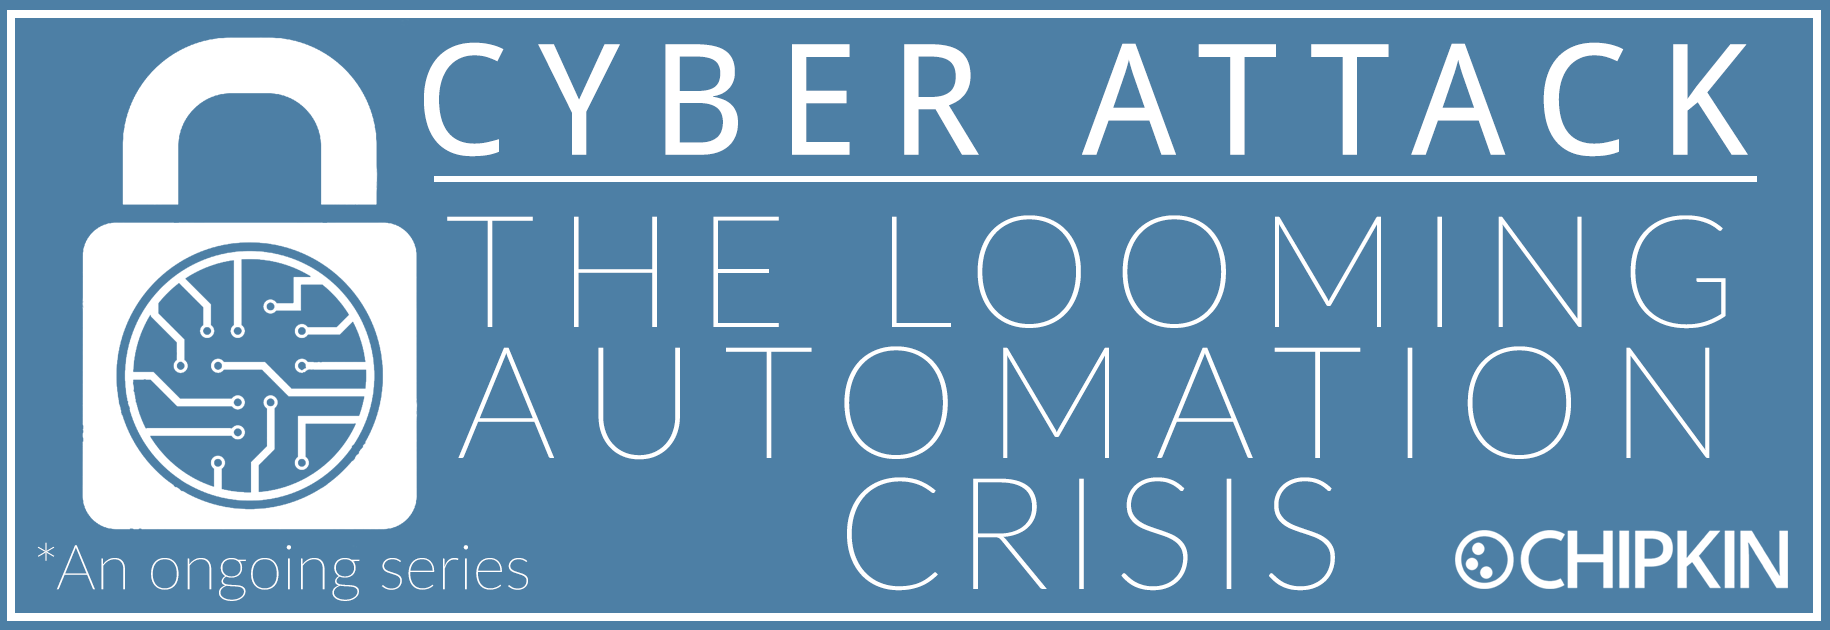 https://cdn.chipkin.com/assets/uploads/2018/Nov/Newsletter - Cyber Attack The Looming Automation Crisis_03-14-54-23_24-11-32-37_05-12-21-34.png